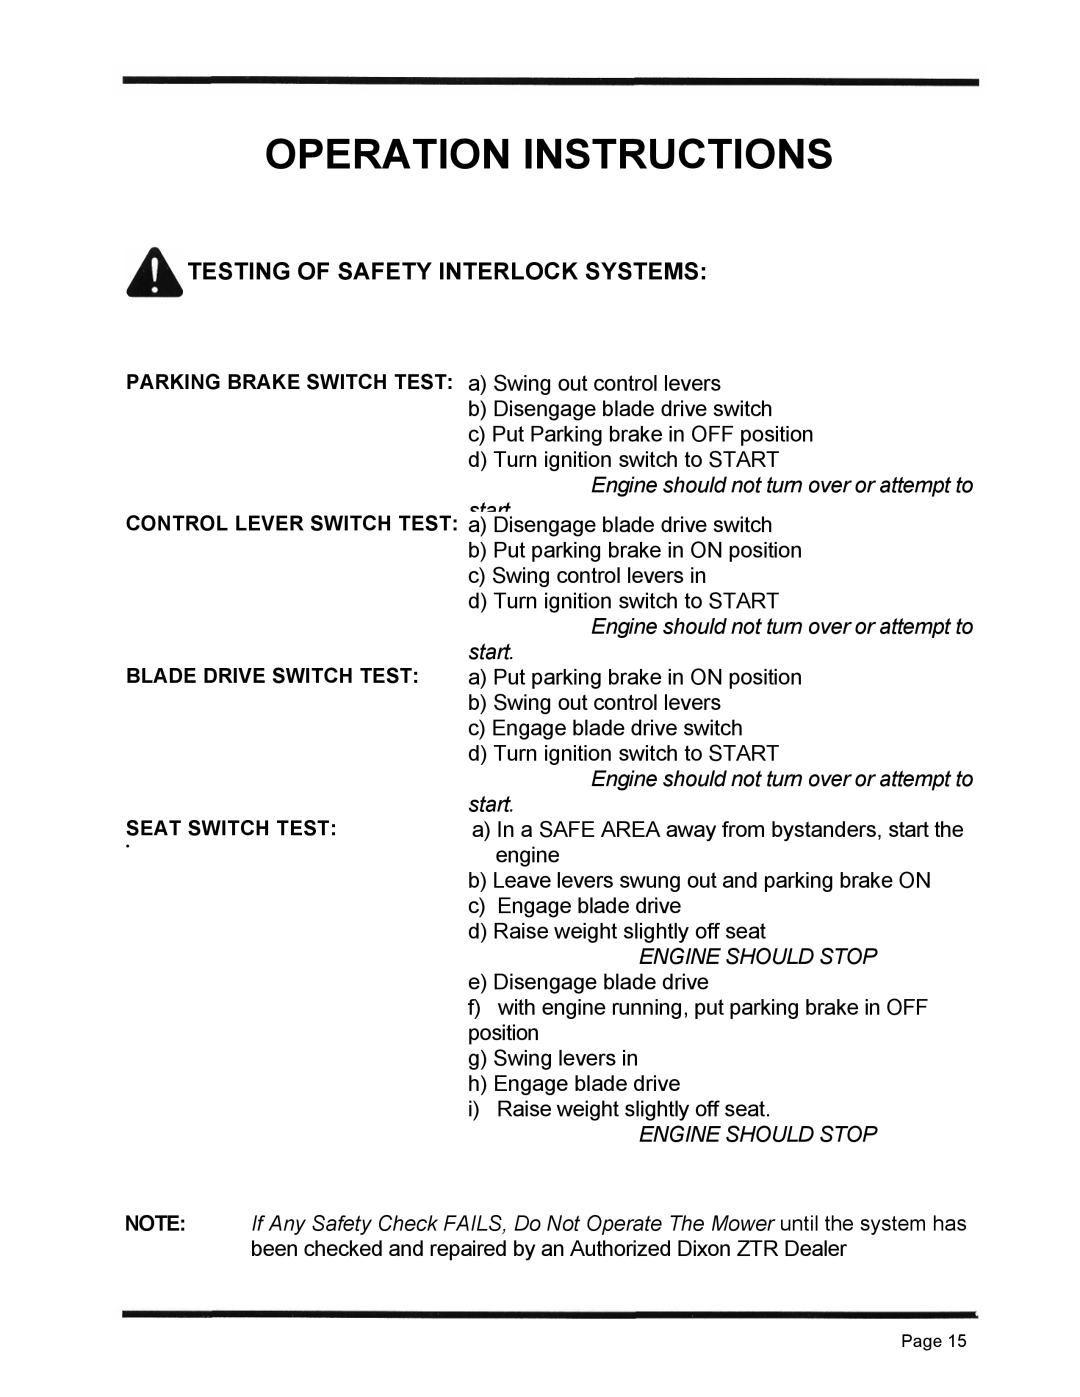 Dixon ZTR 4515K, 1998 manual Operation Instructions, Testing Of Safety Interlock Systems, Engine Should Stop 